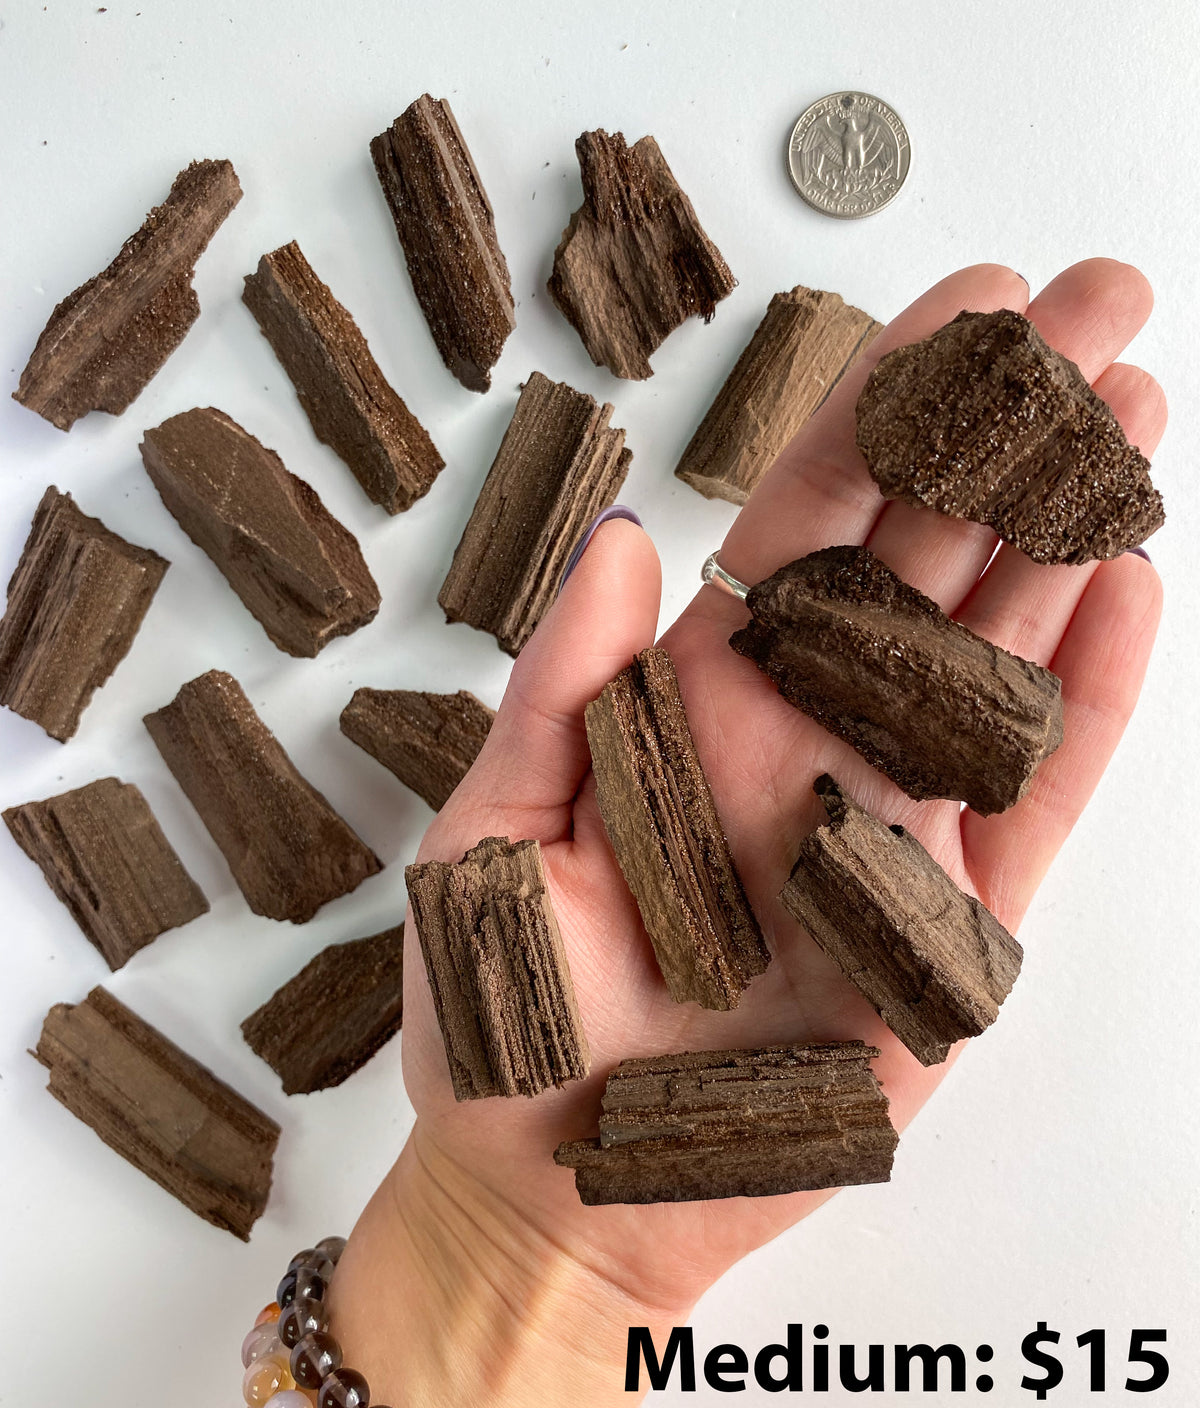 Permineralized Wood Specimens